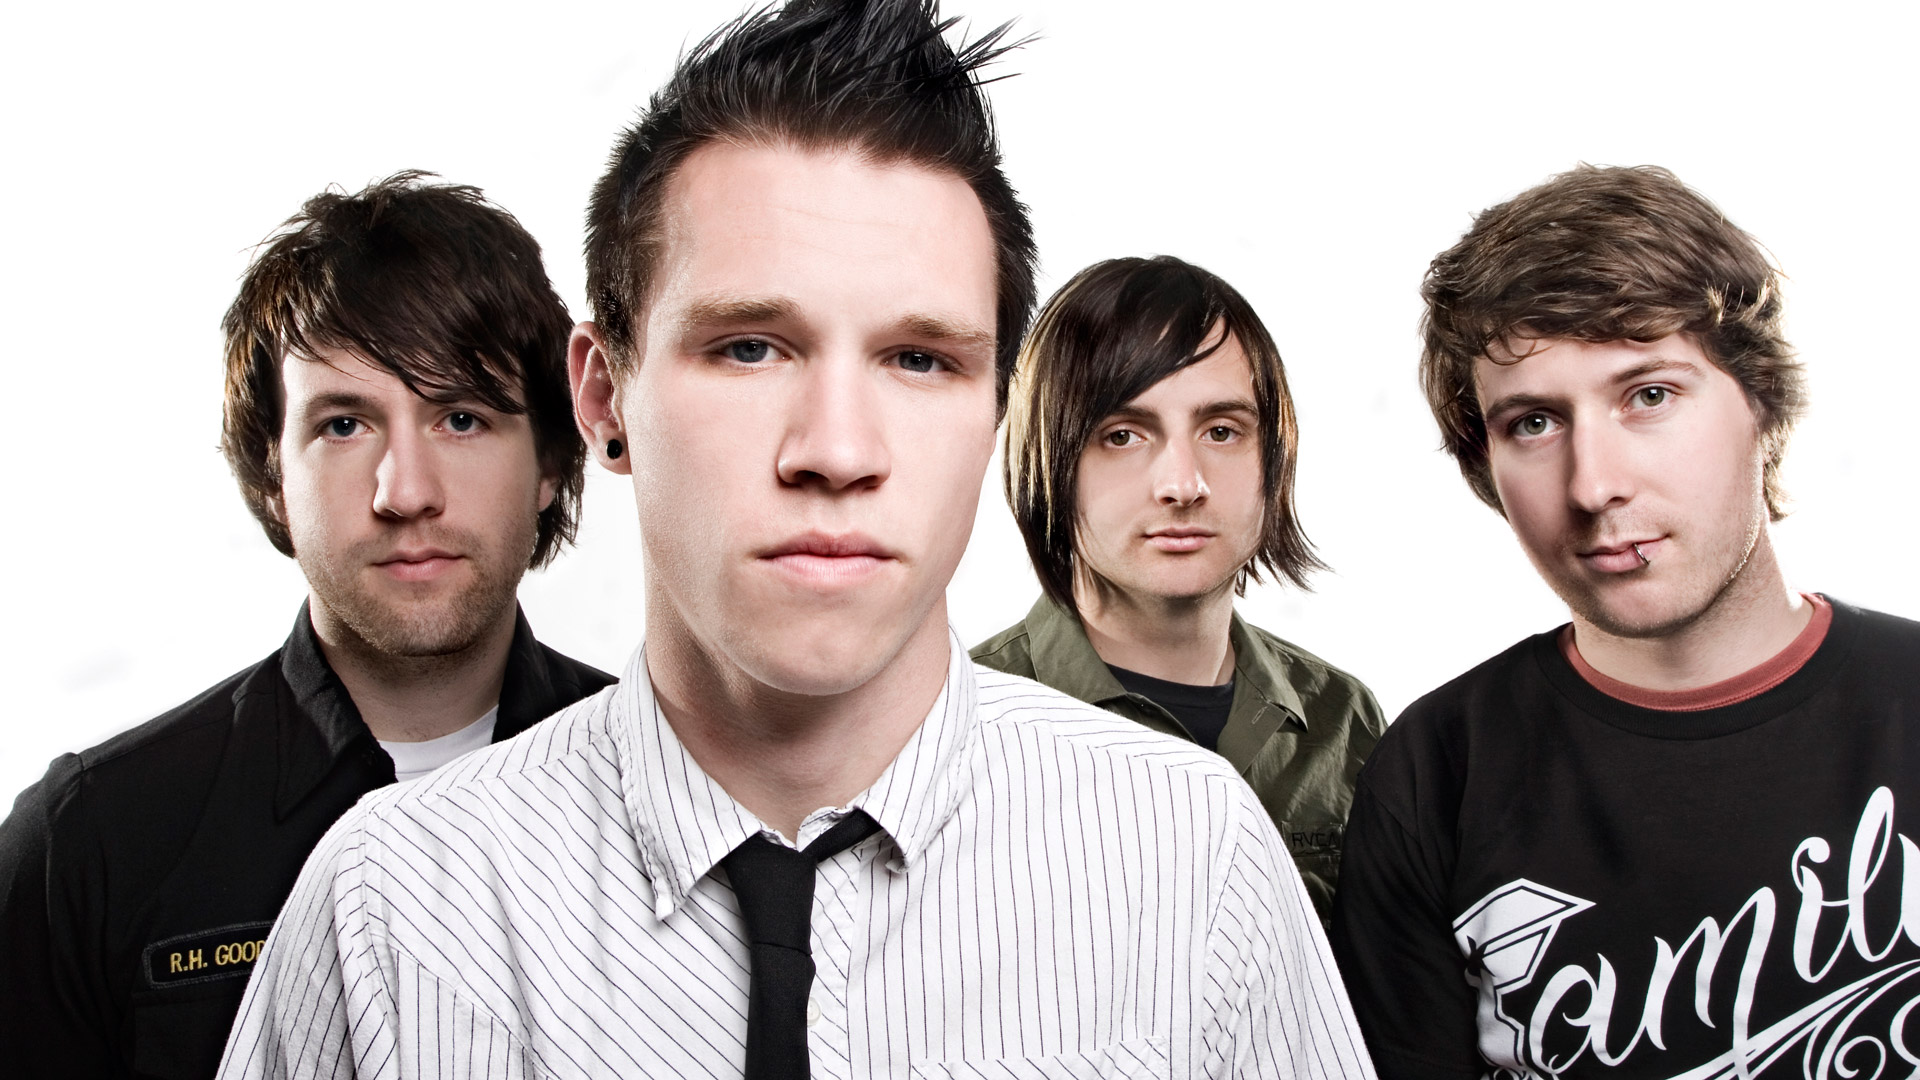 Download mobile wallpaper Hawk Nelson, Music for free.